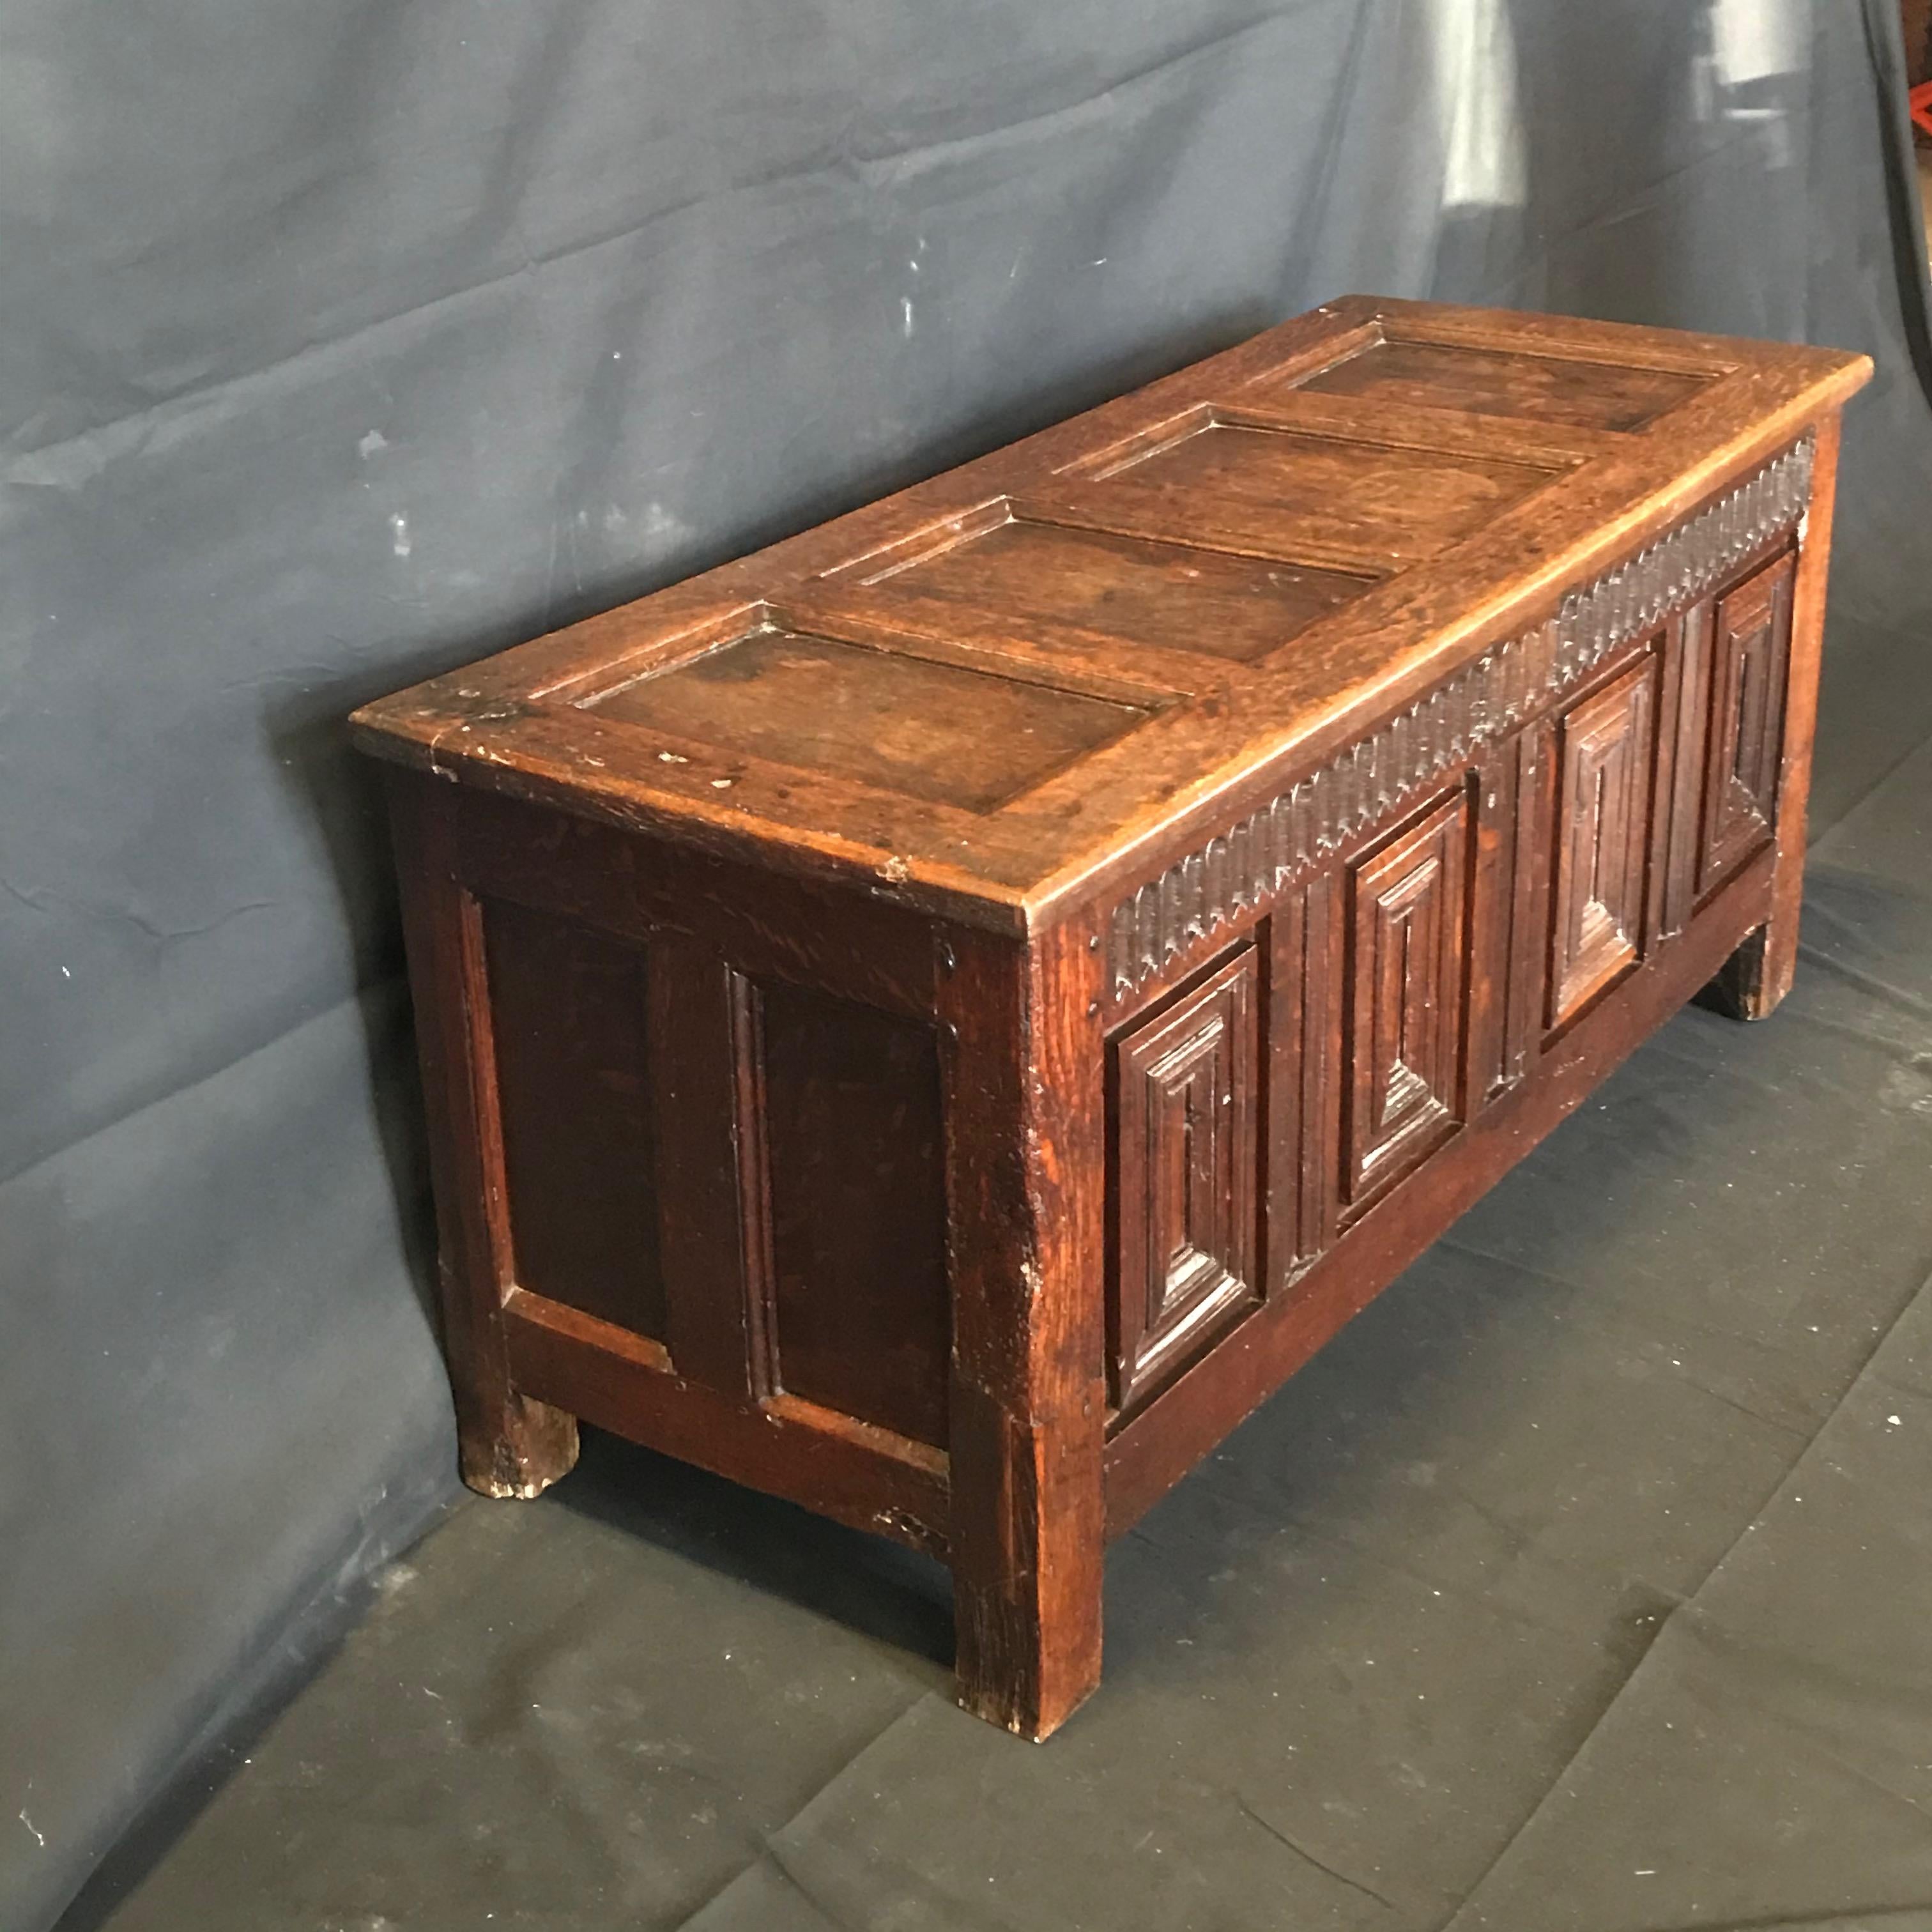 Gorgeous rare early 18th century highly carved and paneled French coffer, with four panels to the front, two panels to each side, raised on stile feet, unusual fitted inside, original hammered hinges, beautiful color and patina!
#3474
Measures: H